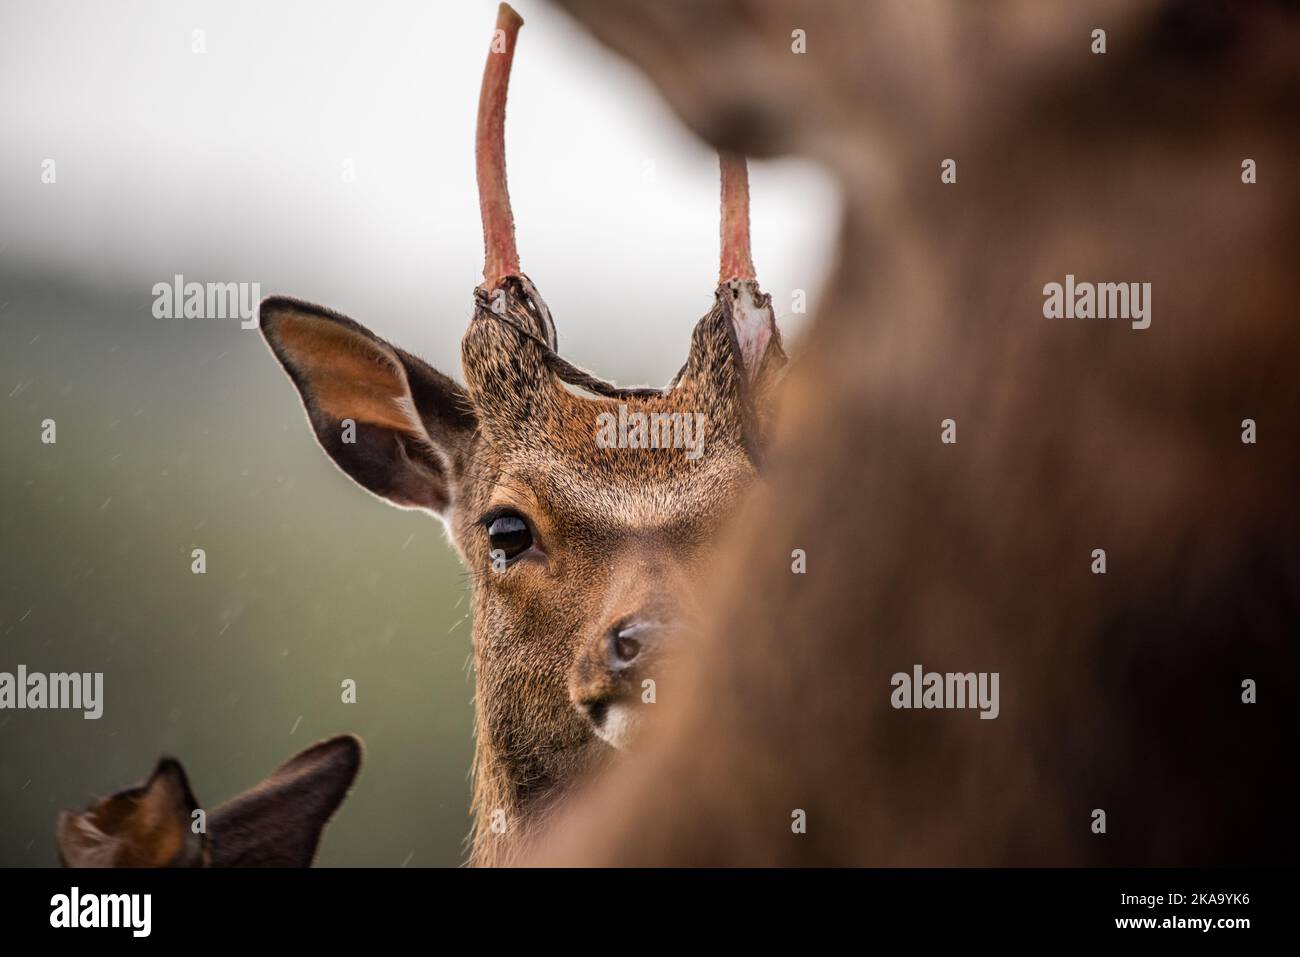 Young sika deer half-face portrait Stock Photo